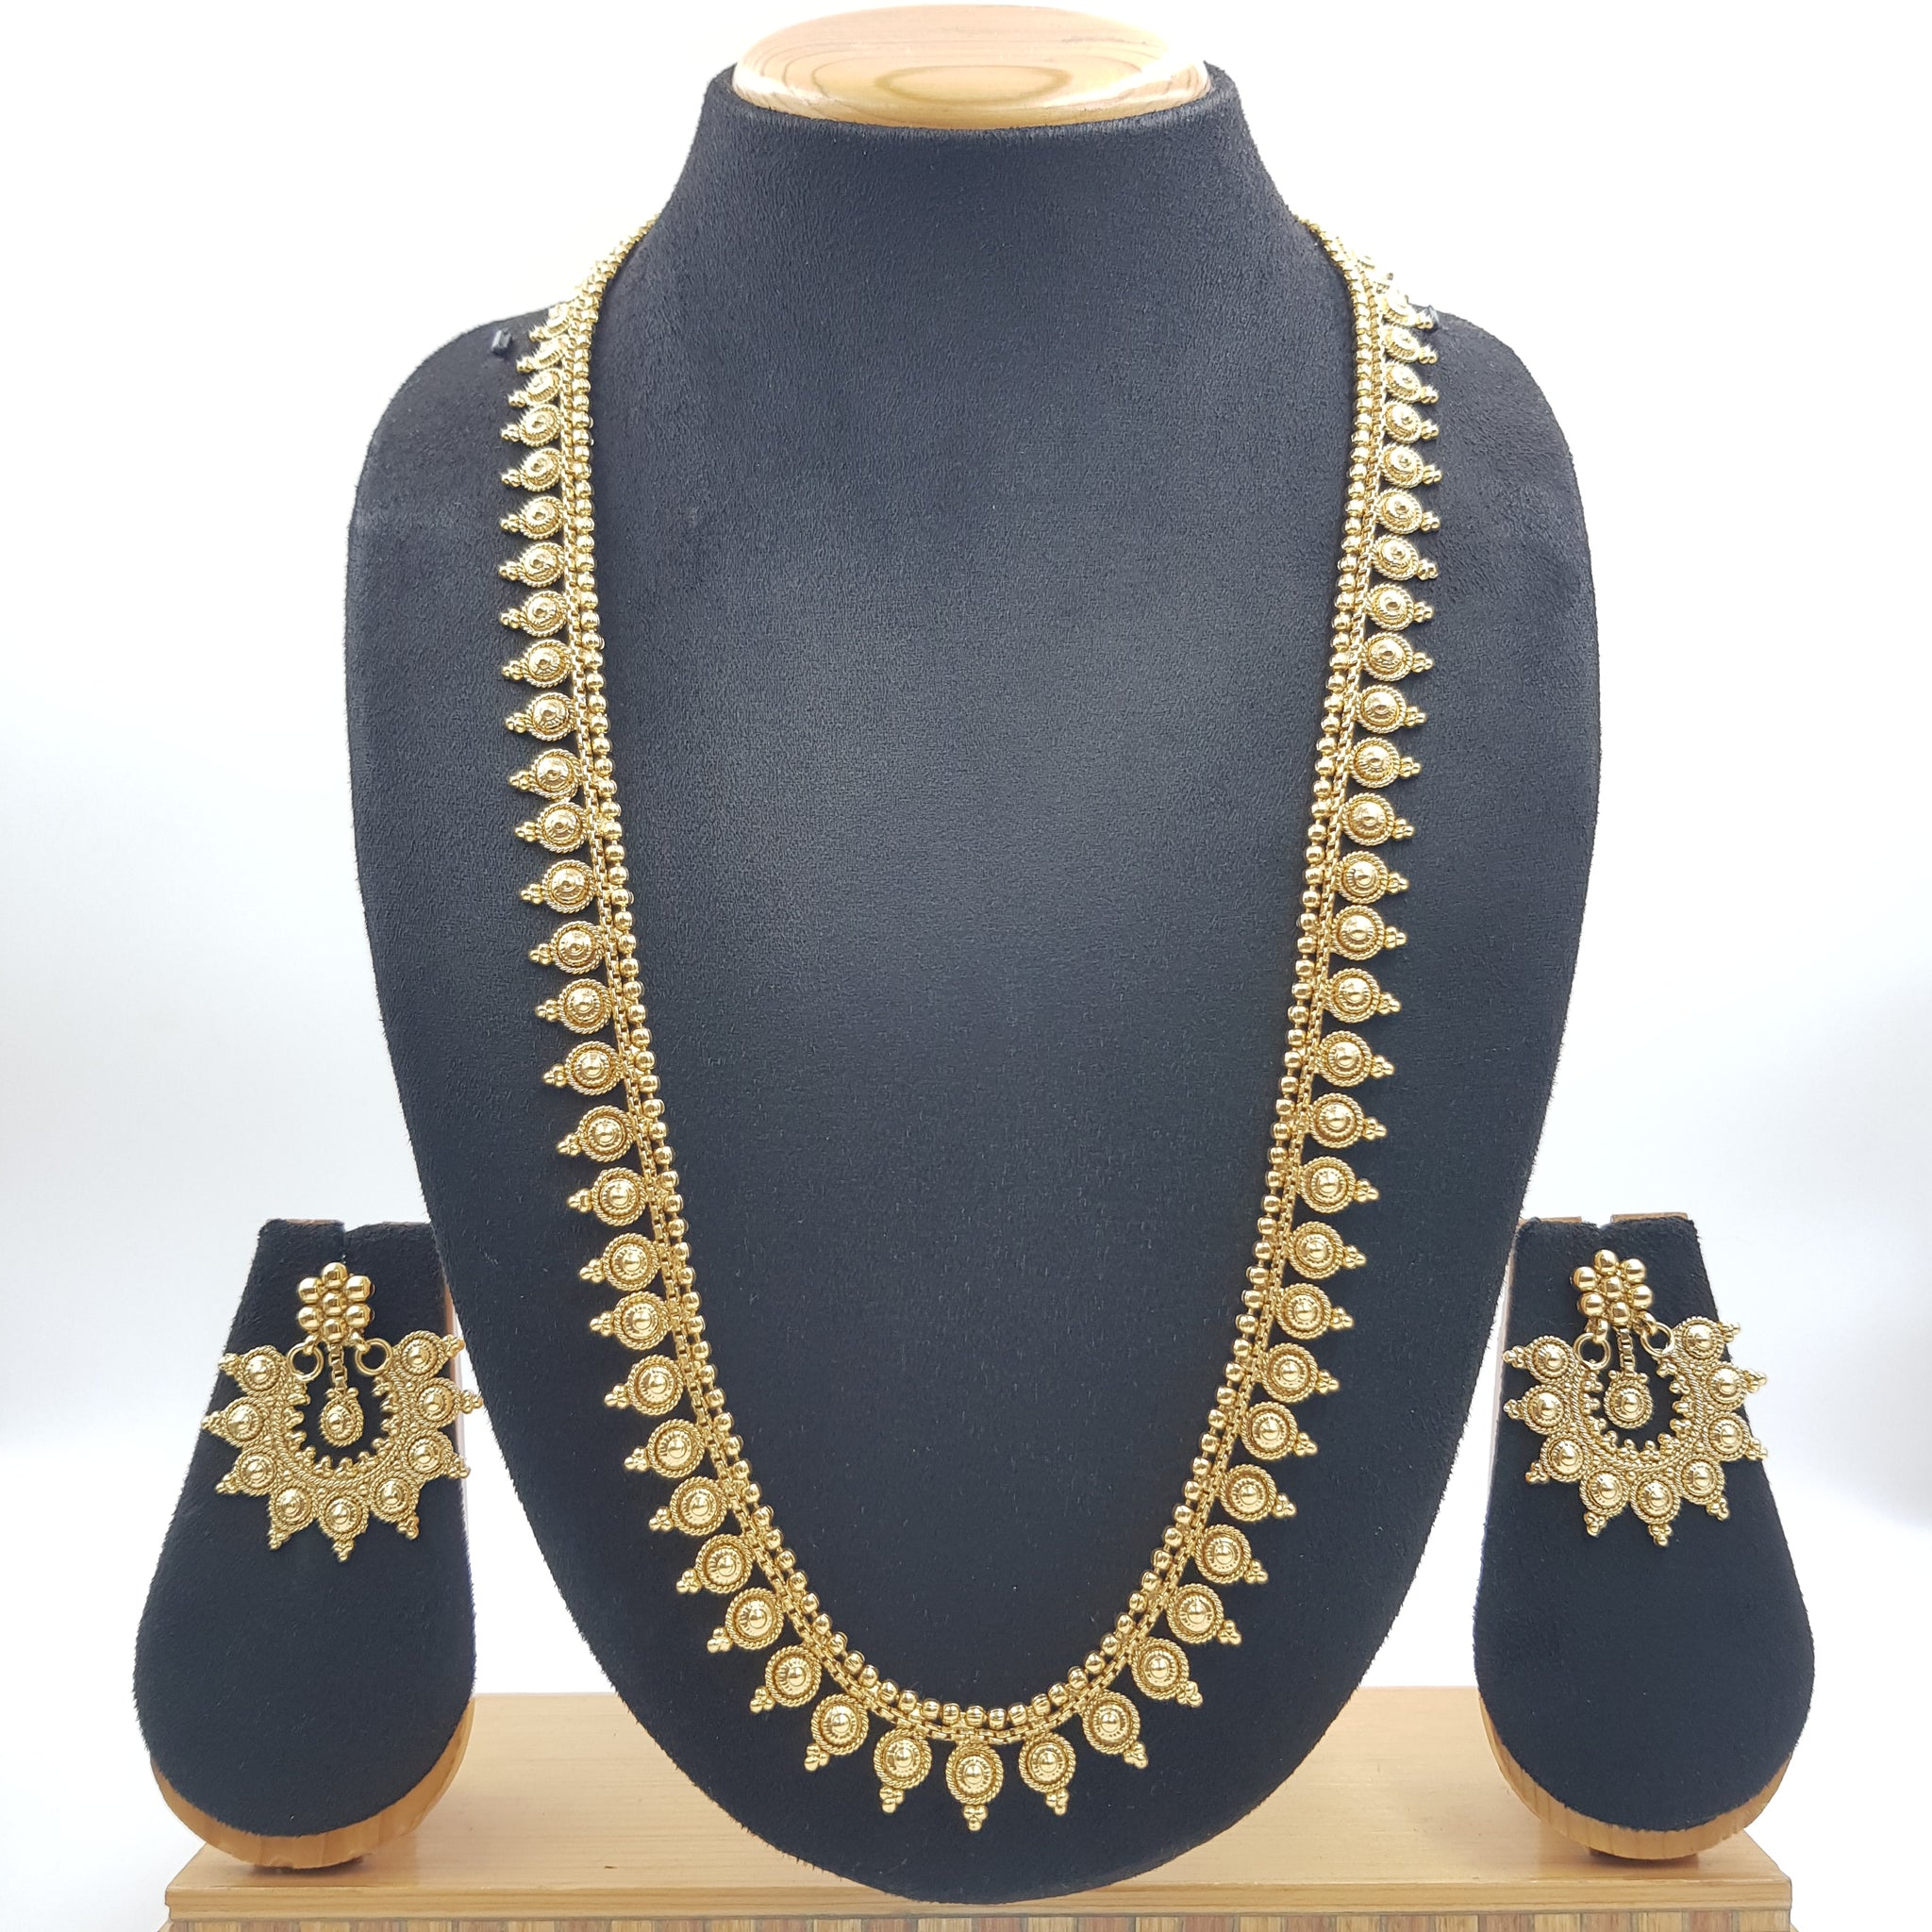 Long Neck Gold Look Necklace Set 7138-33